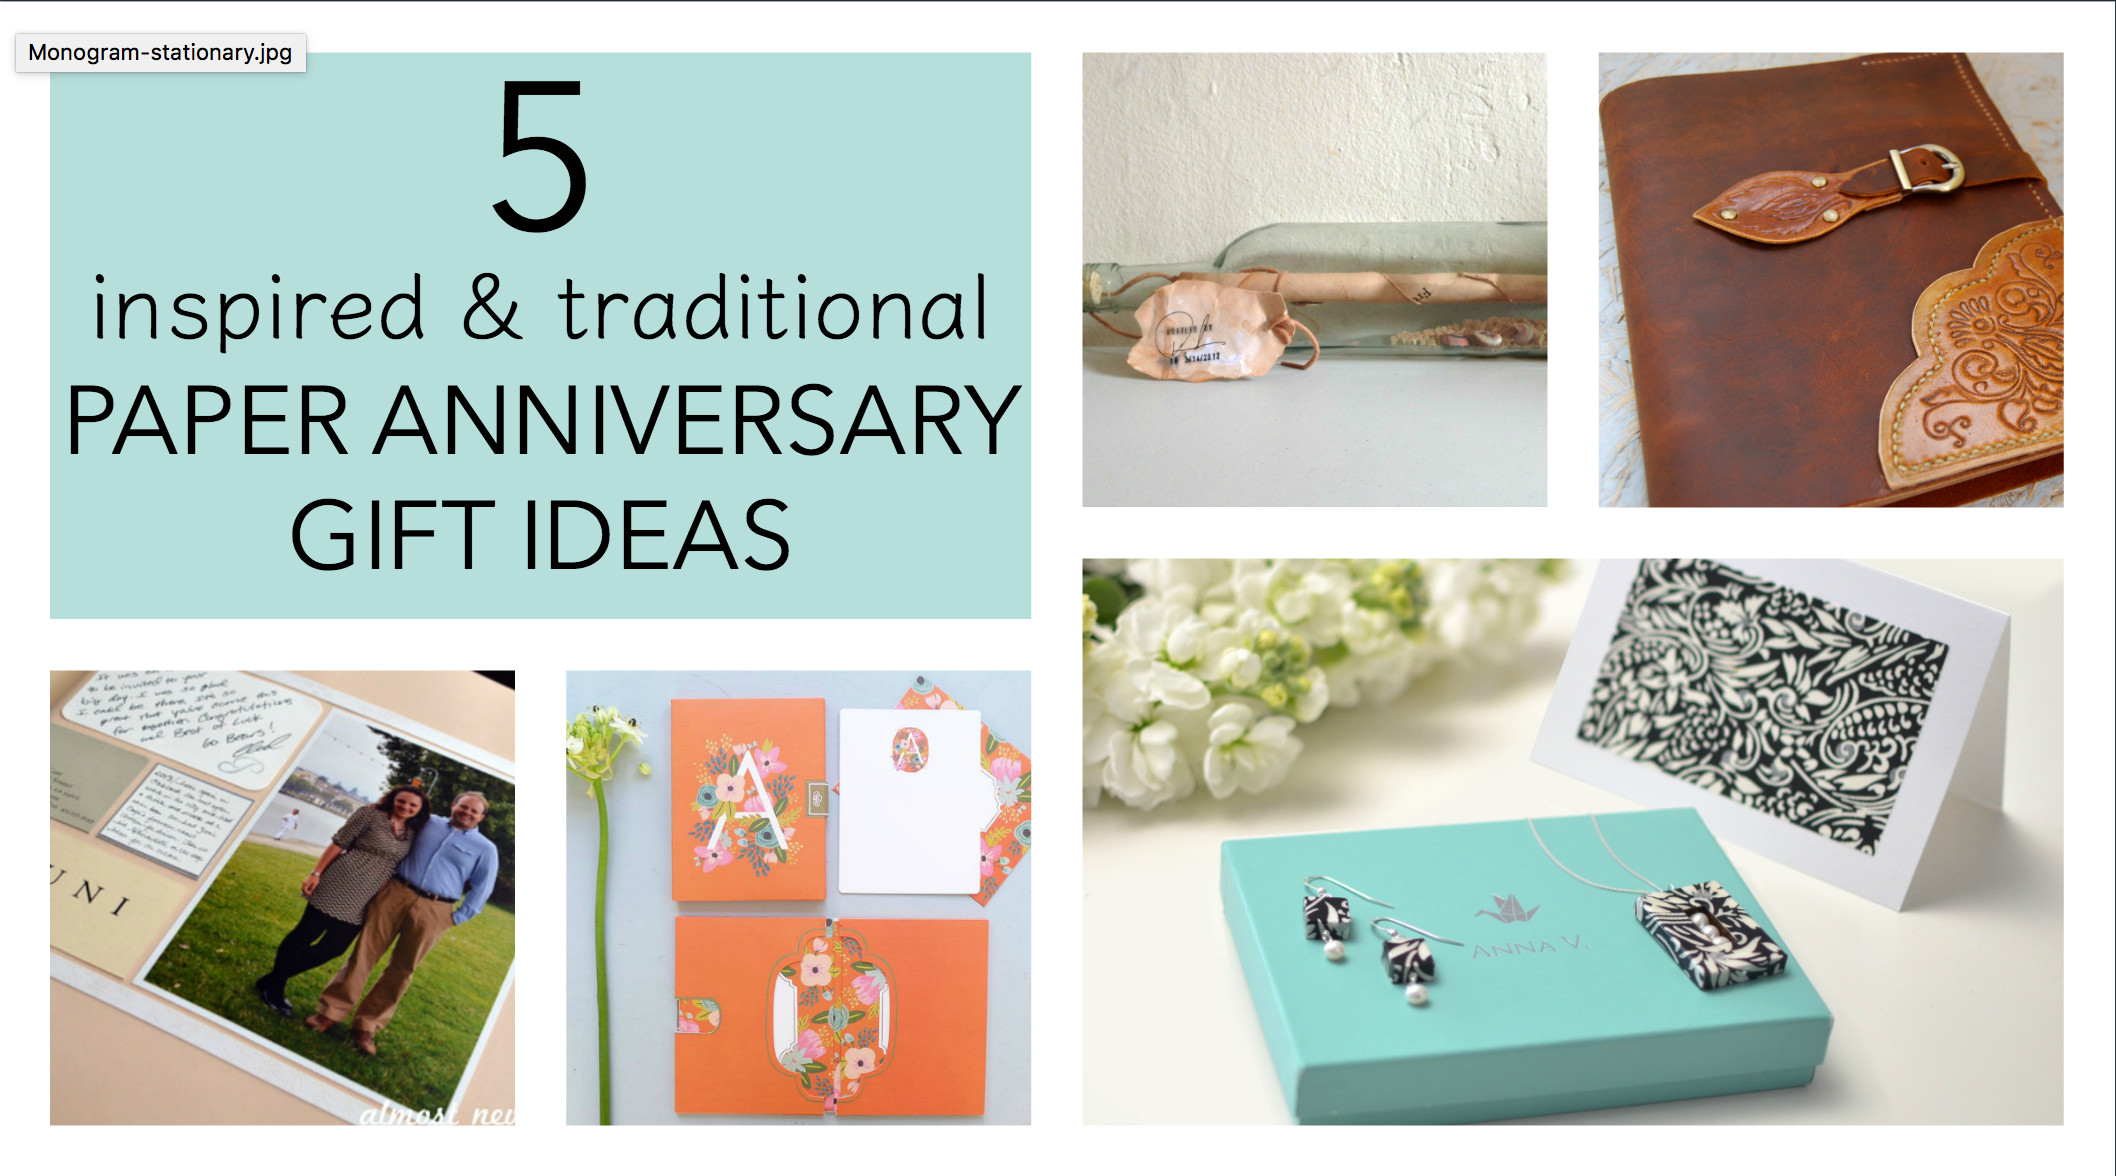 First Anniversary Gift Ideas Paper
 5 Traditional Paper Anniversary Gift Ideas for Her Paper